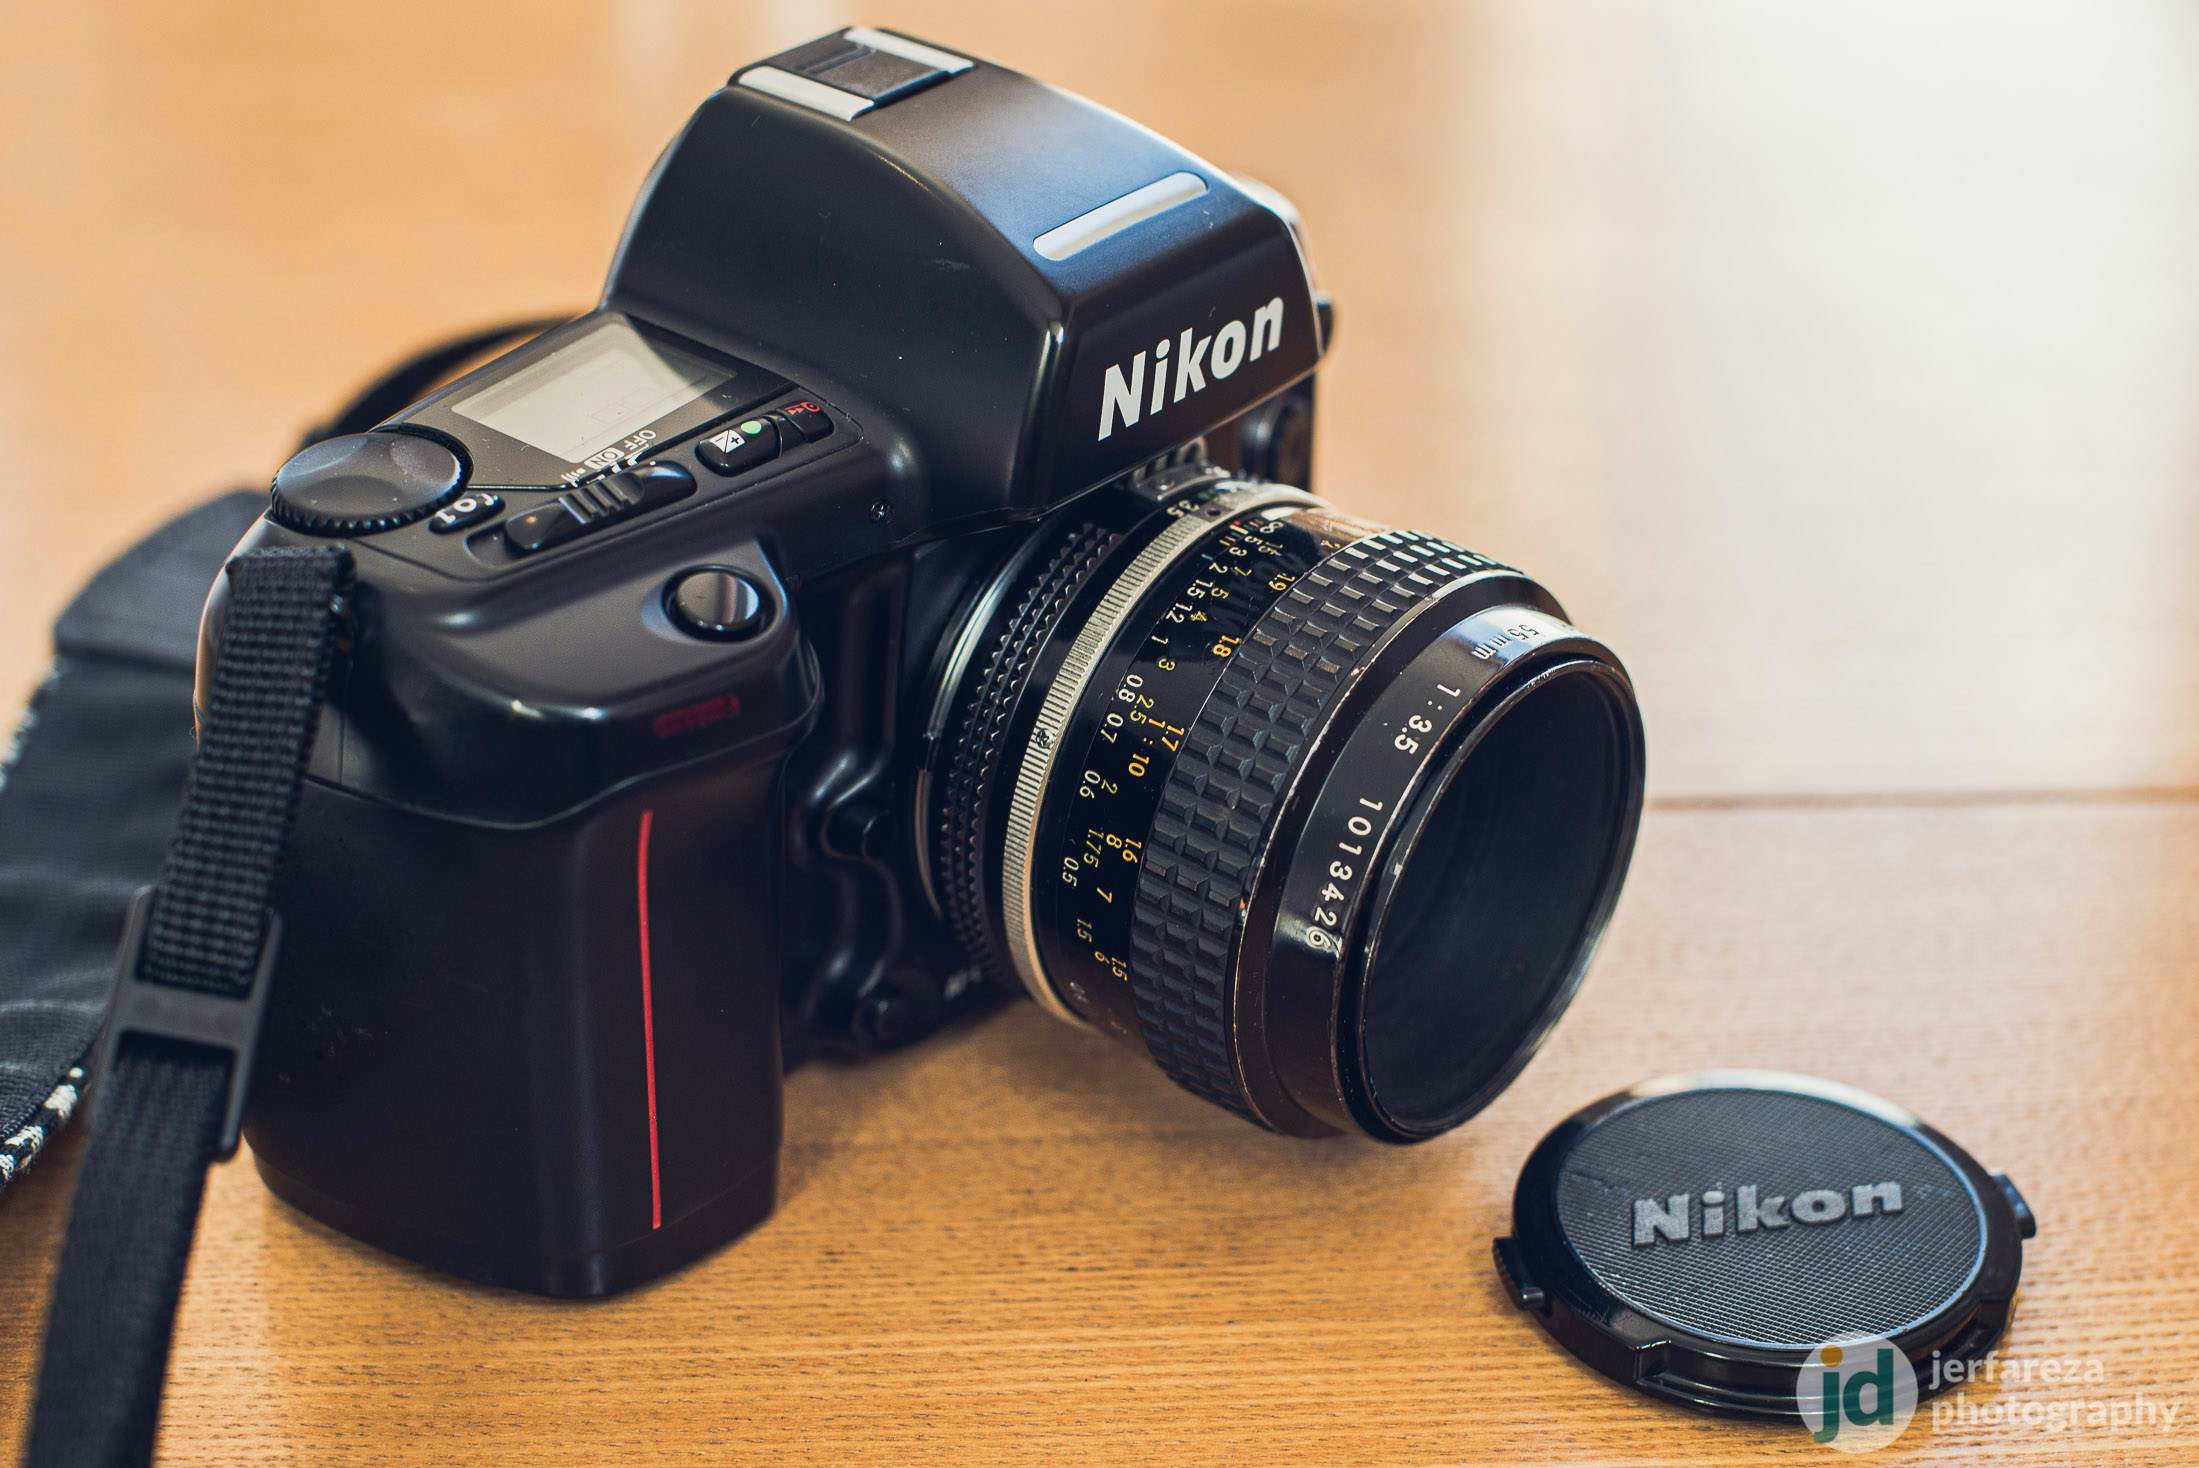 [Lens Review] Nikkor 55mm f/3.5 AI Micro